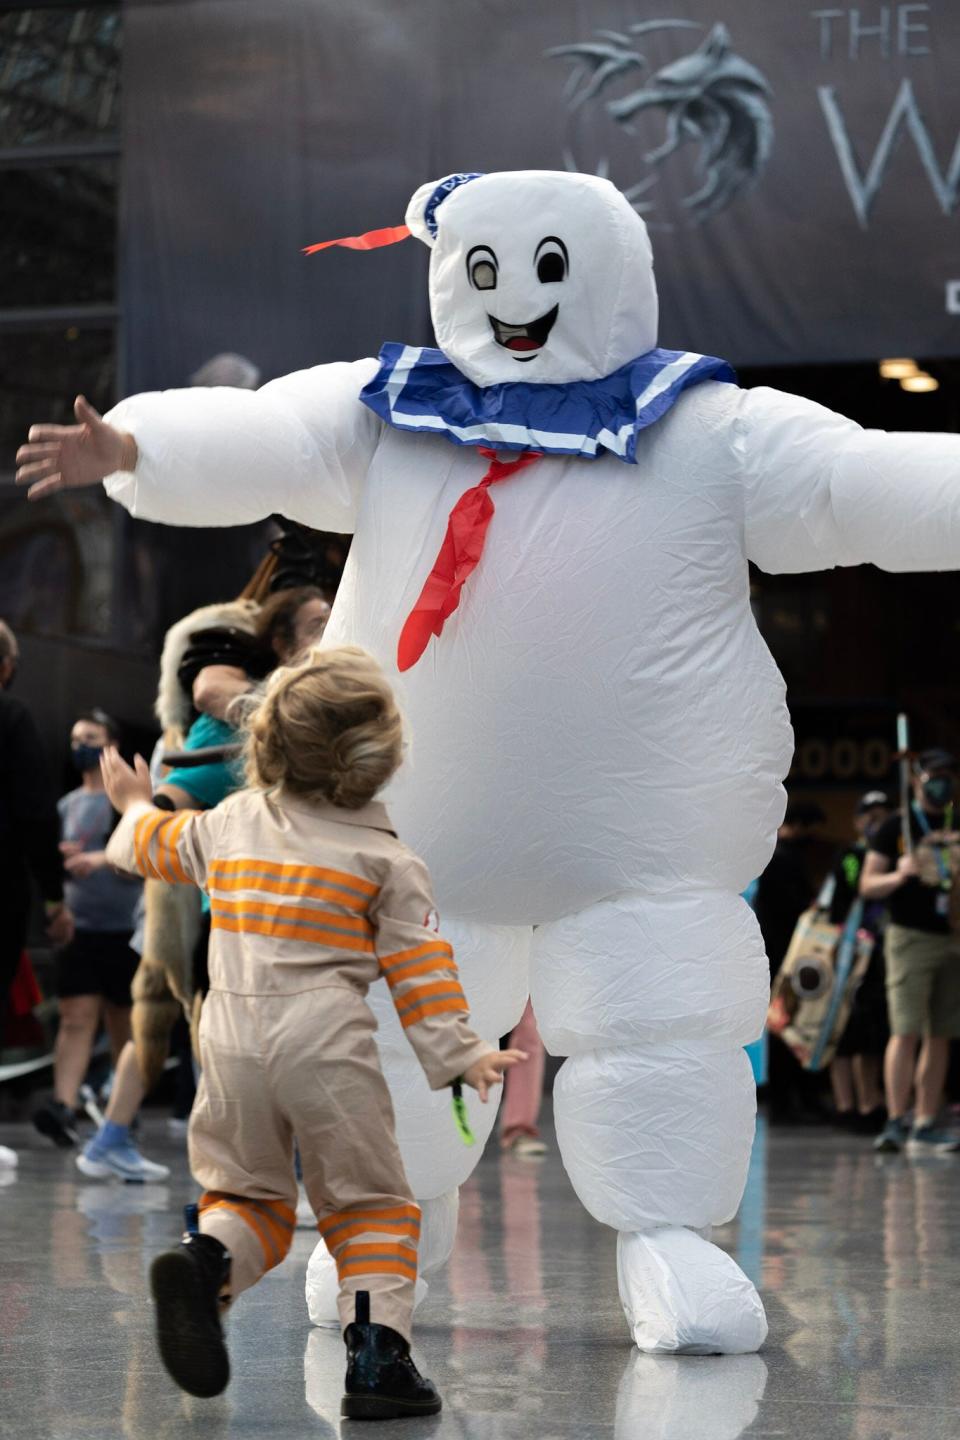 A cosplayer dressed as the Stay Puft Marshmallow from "Ghostbusters" at New York Comic Con 2021.